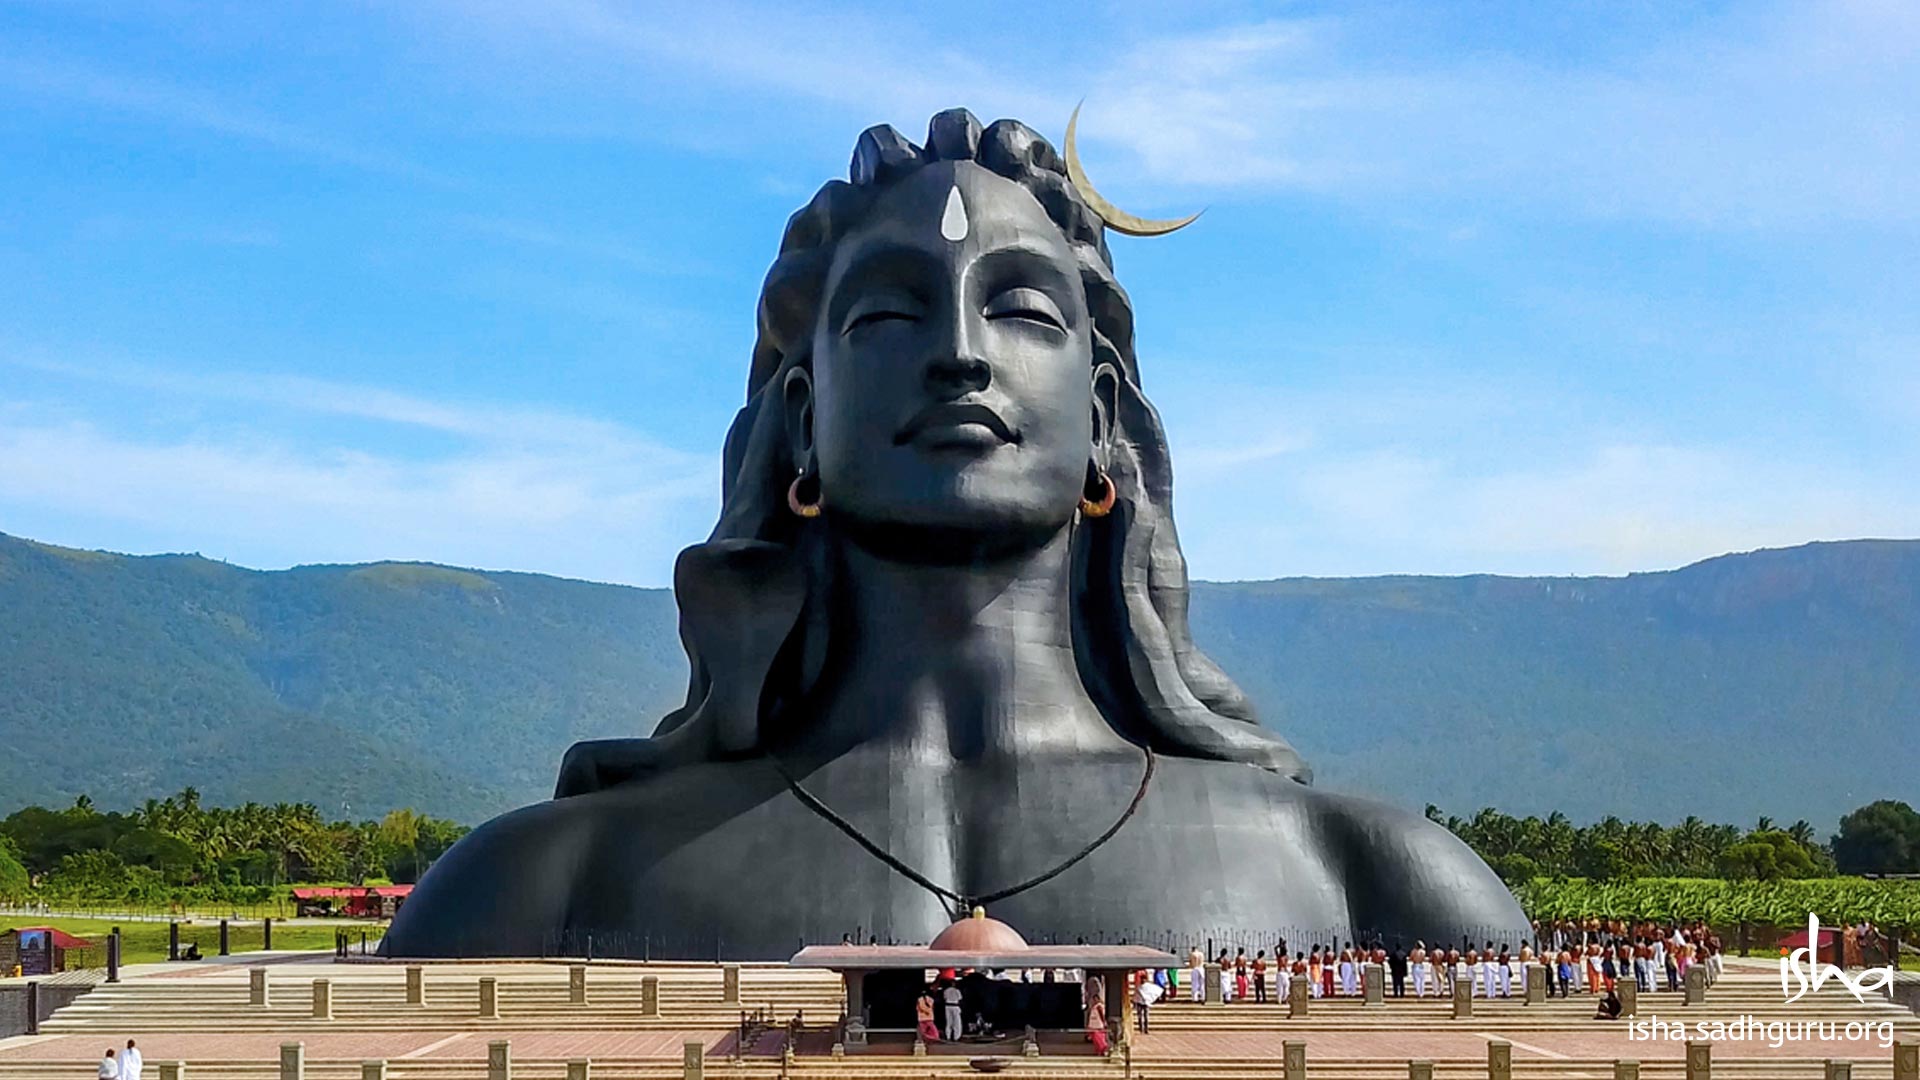 60 Shiva Adiyogi Wallpapers Hd Free Download For Mobile And Desktop Find the best lord shiva wallpapers on wallpapertag. 60 shiva adiyogi wallpapers hd free